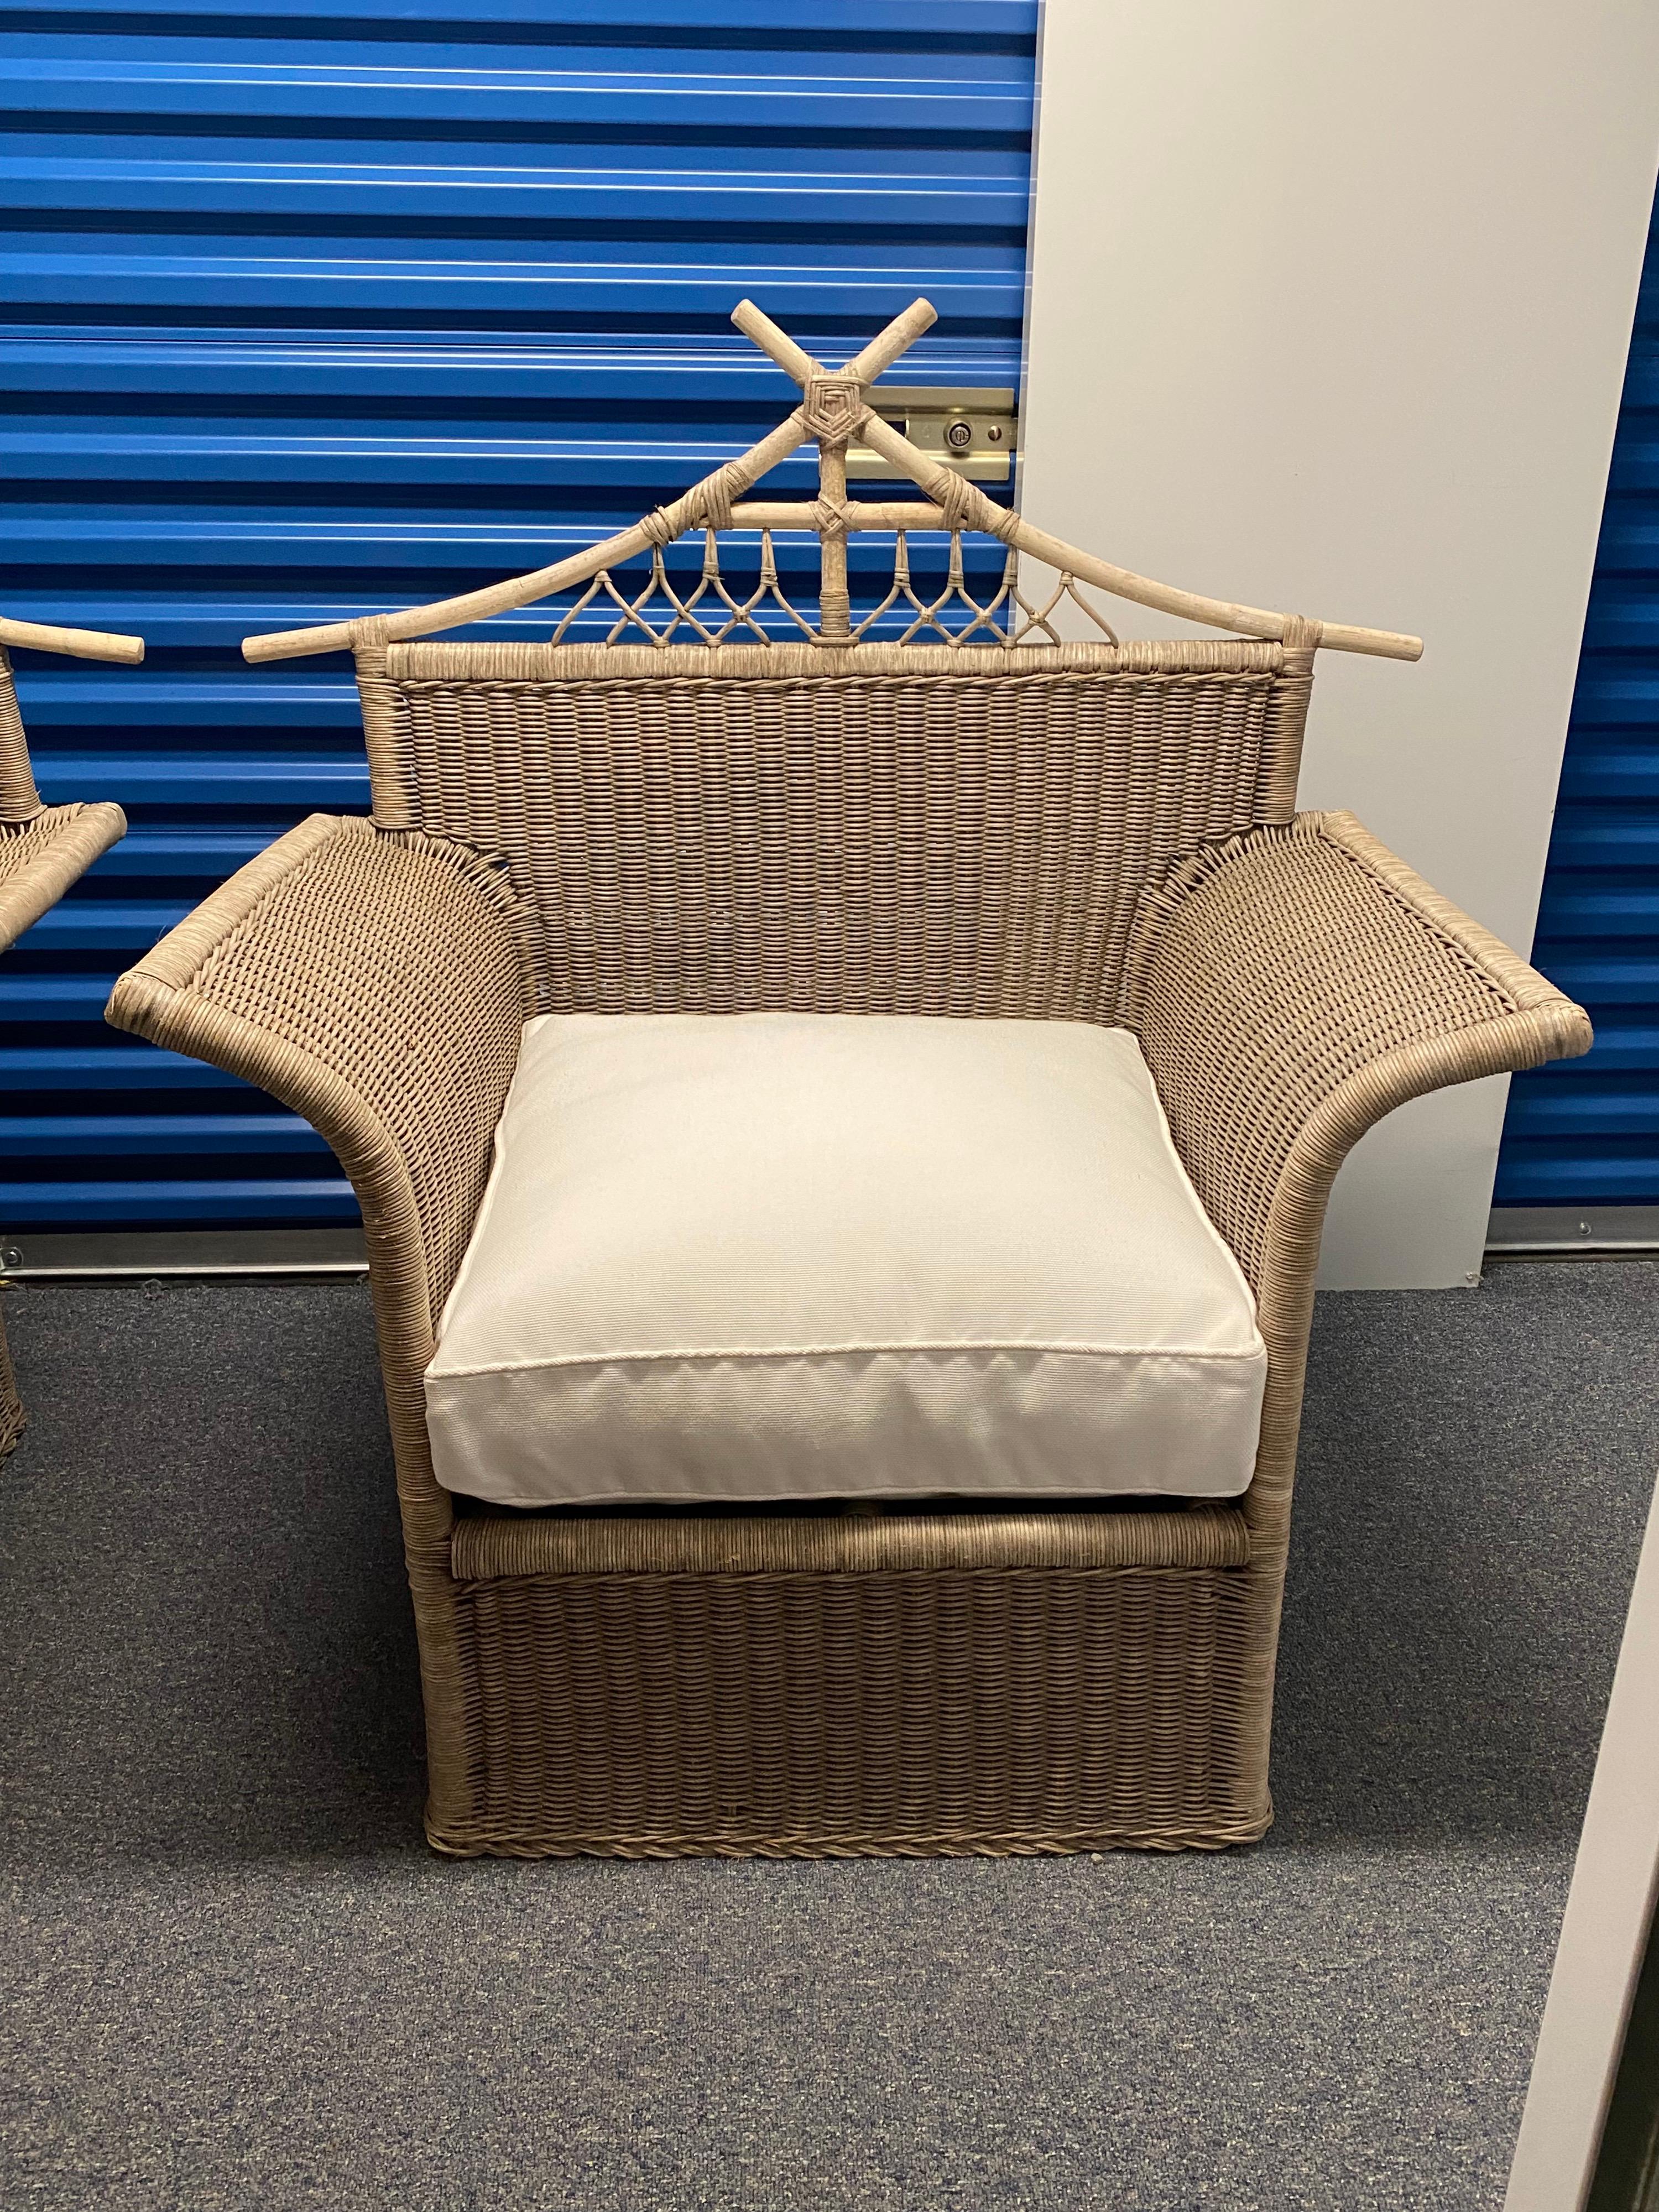 Rare pair of Valentino wicker chairs, 1970s
Very rare pair of rattan and wicker chairs made in the 70s by Valentino. Valentino created a small collection of wicker pieces in the late 70s/80s. The designs were fabulous and unexpected, as you would